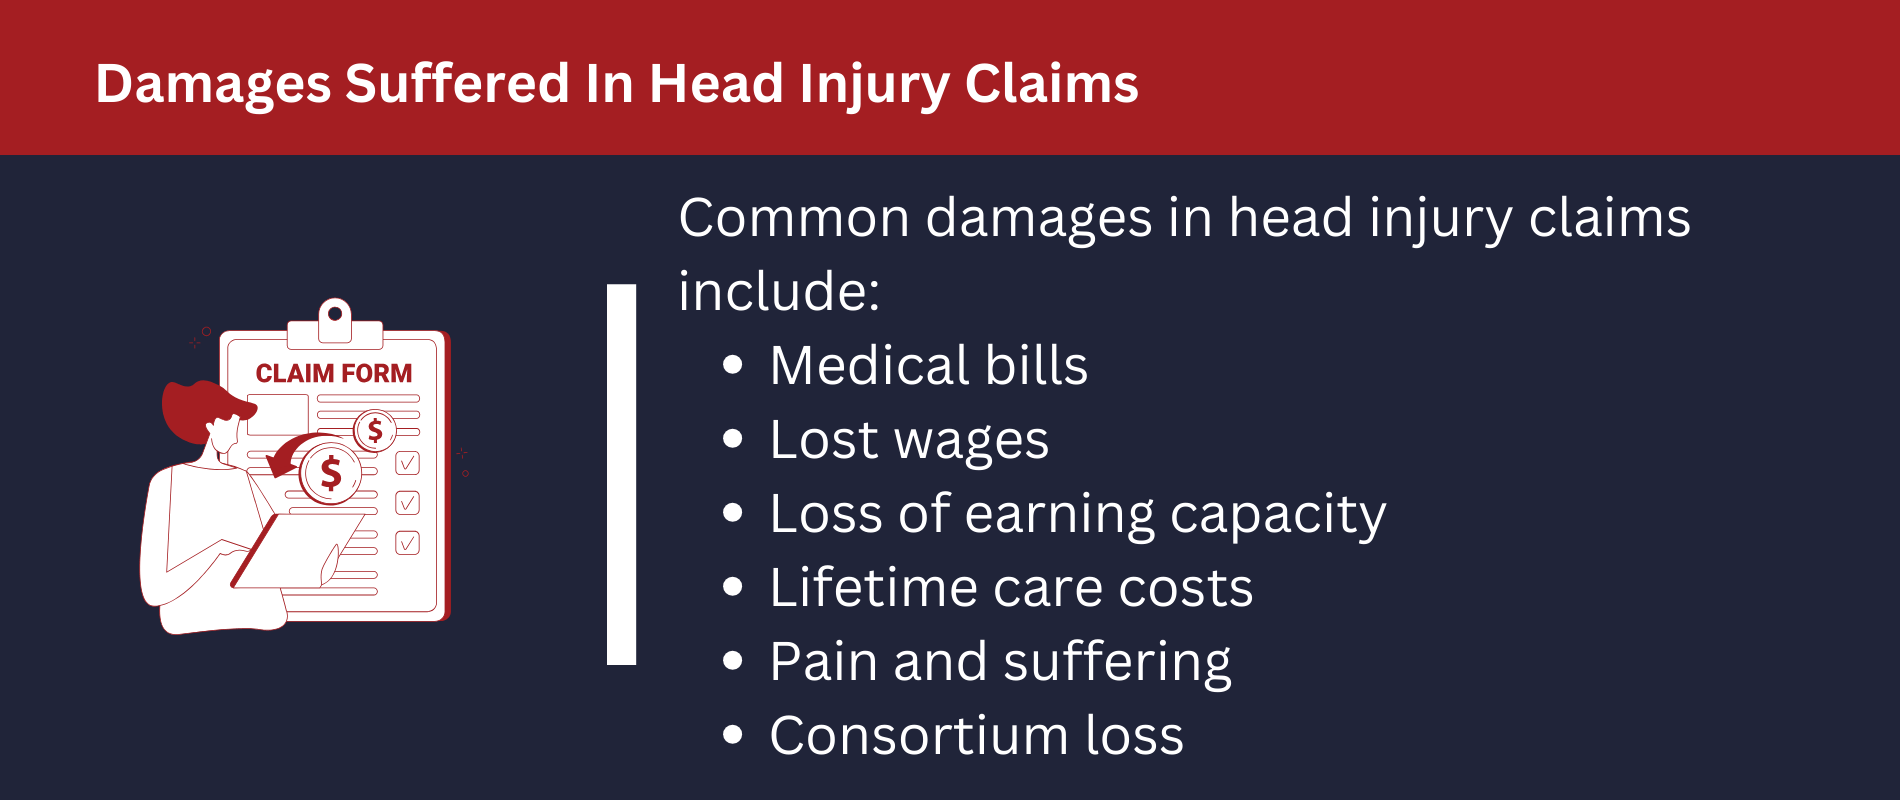 Damages suffered in head injury claims